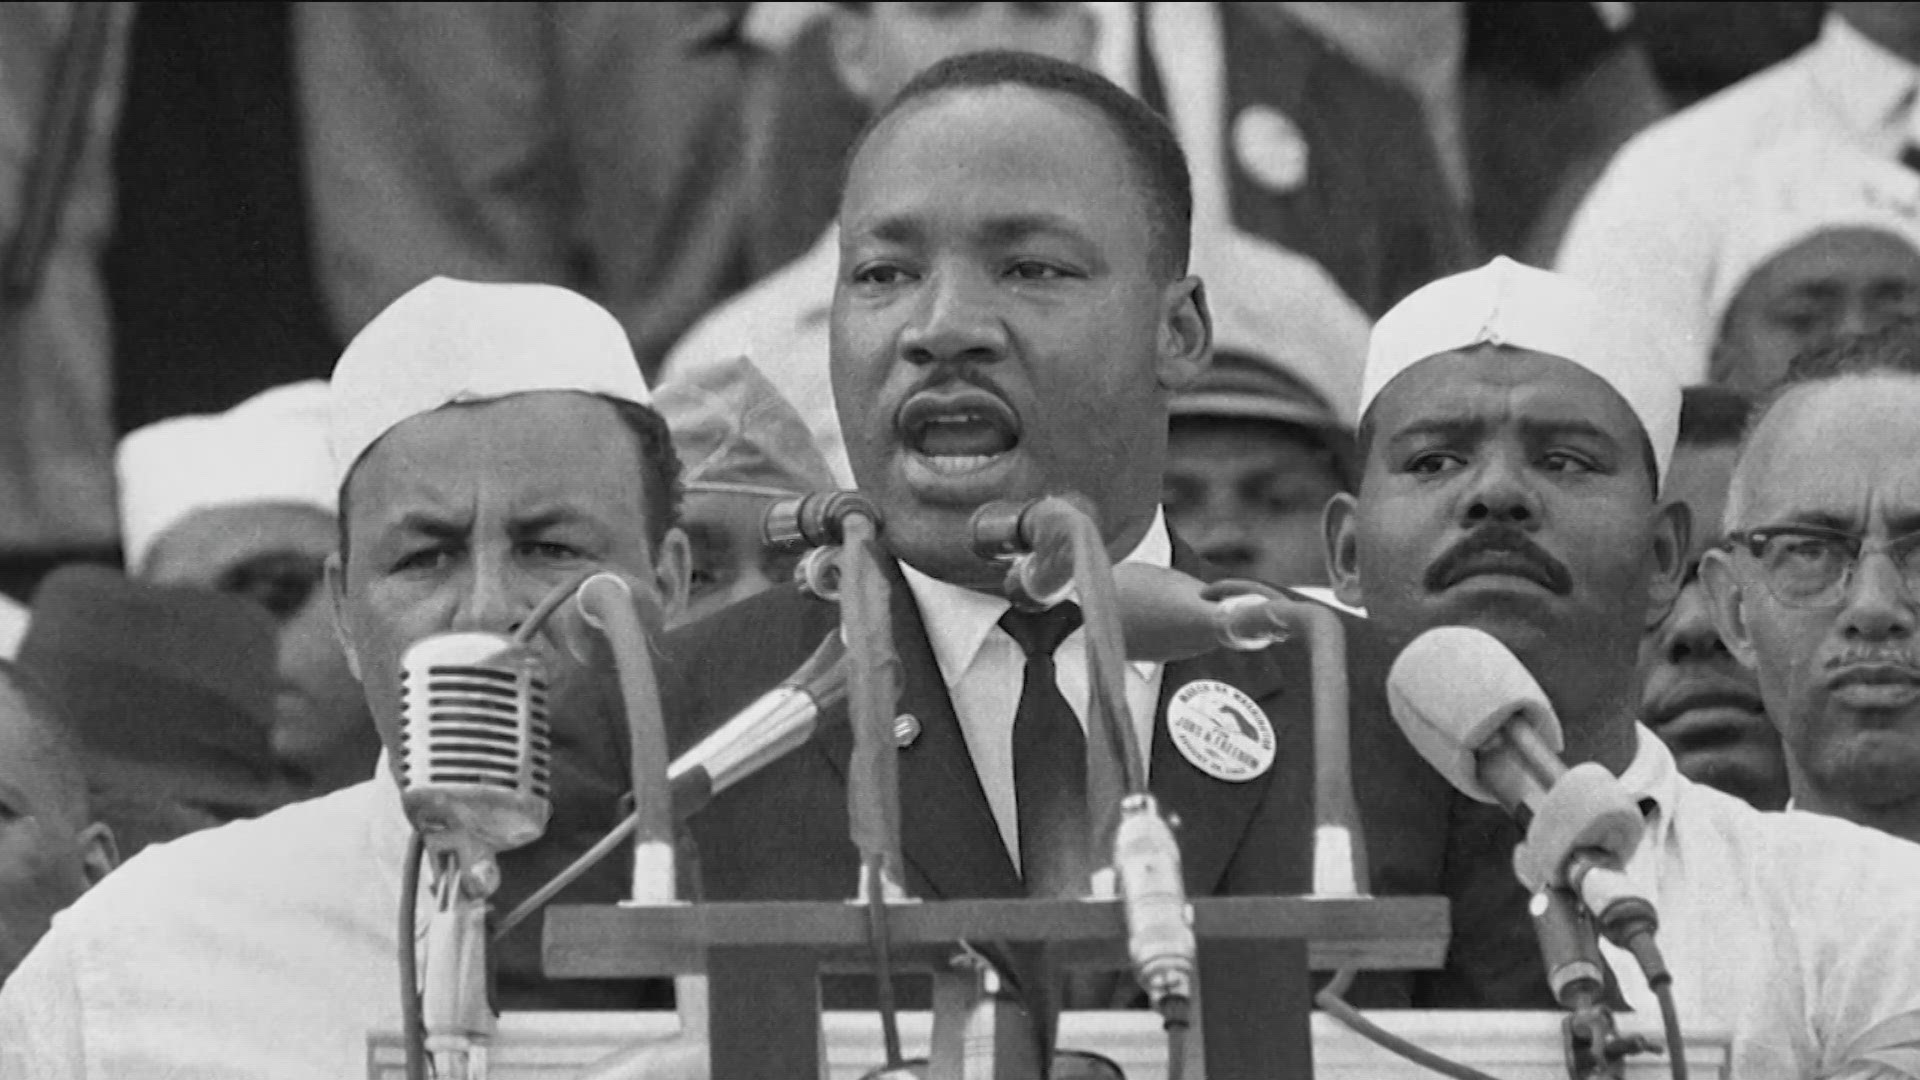 April 4 marks 56 years since Rev. Dr. Martin Luther King was assassinated.